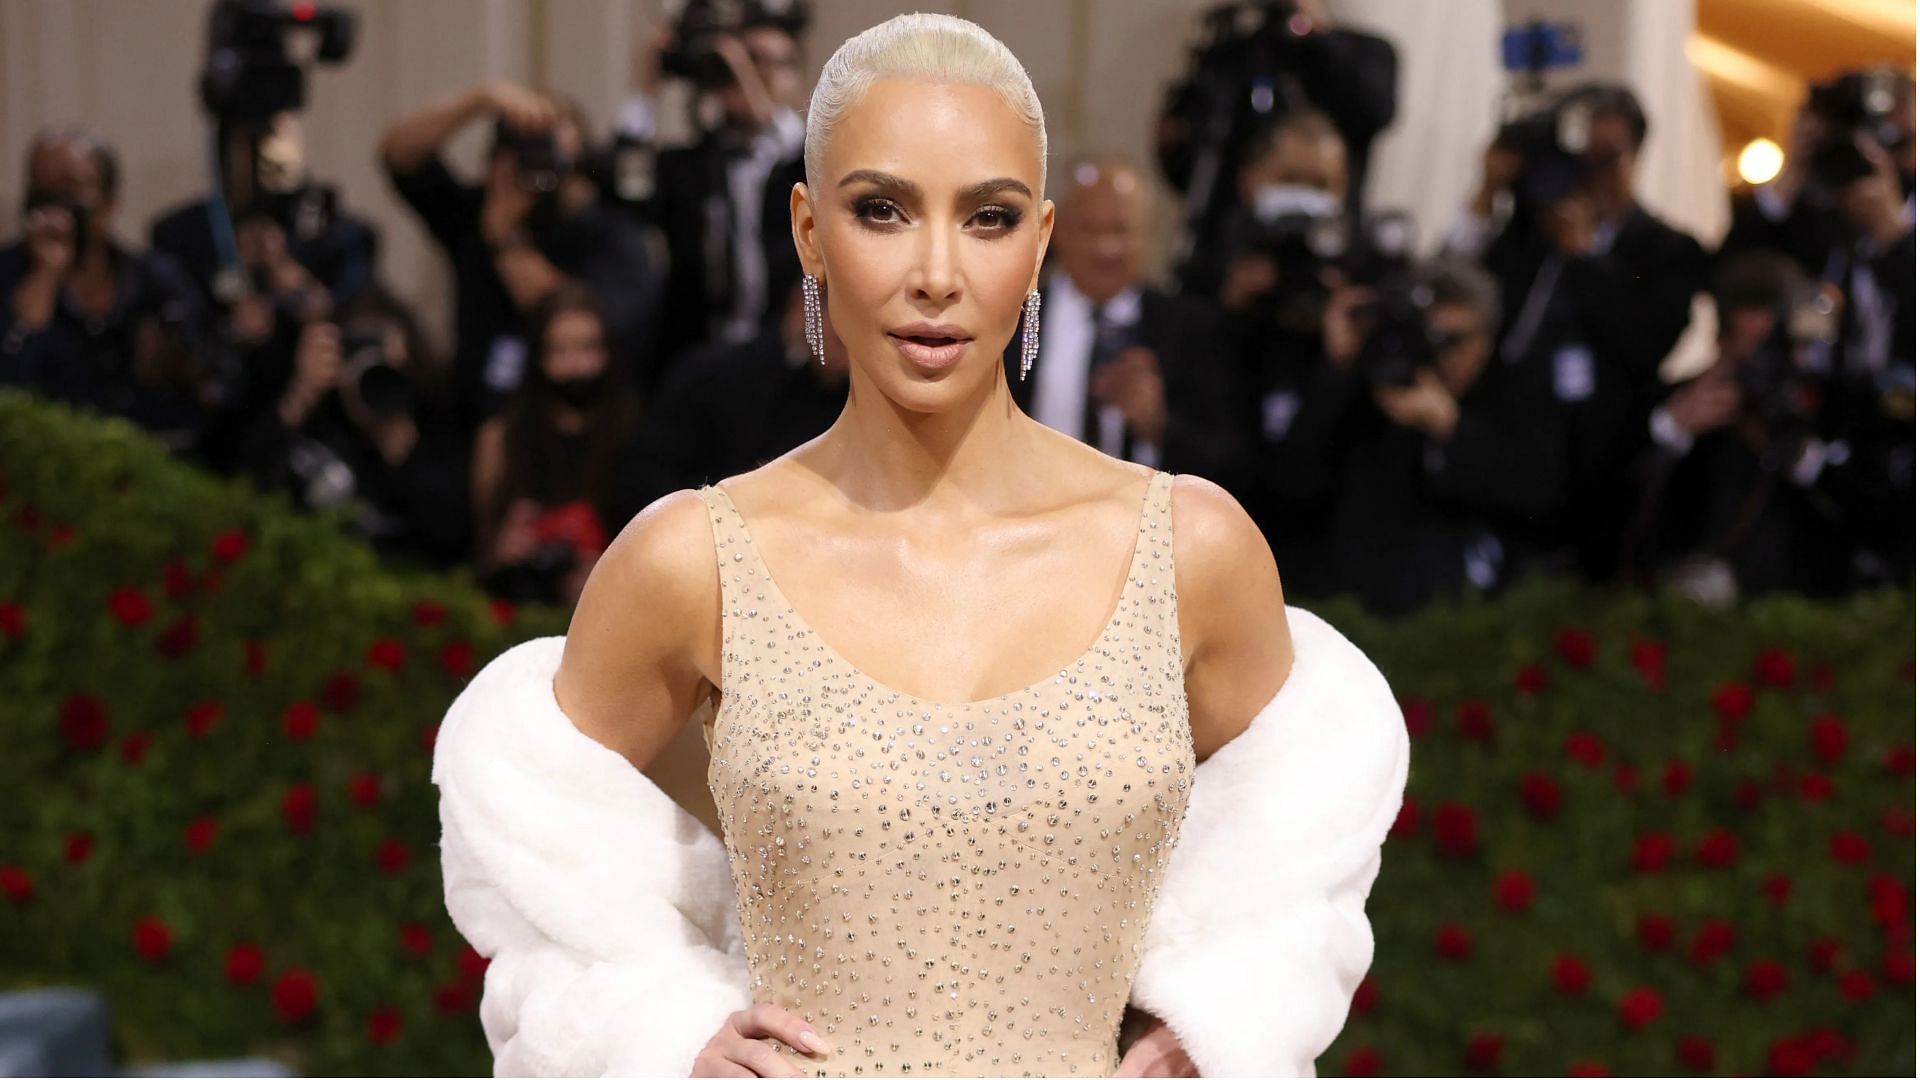 Kim Kardashian wore Marilyn Monroe&#039;s iconic dress, which happens to be 60 years old (Image via Getty Images)